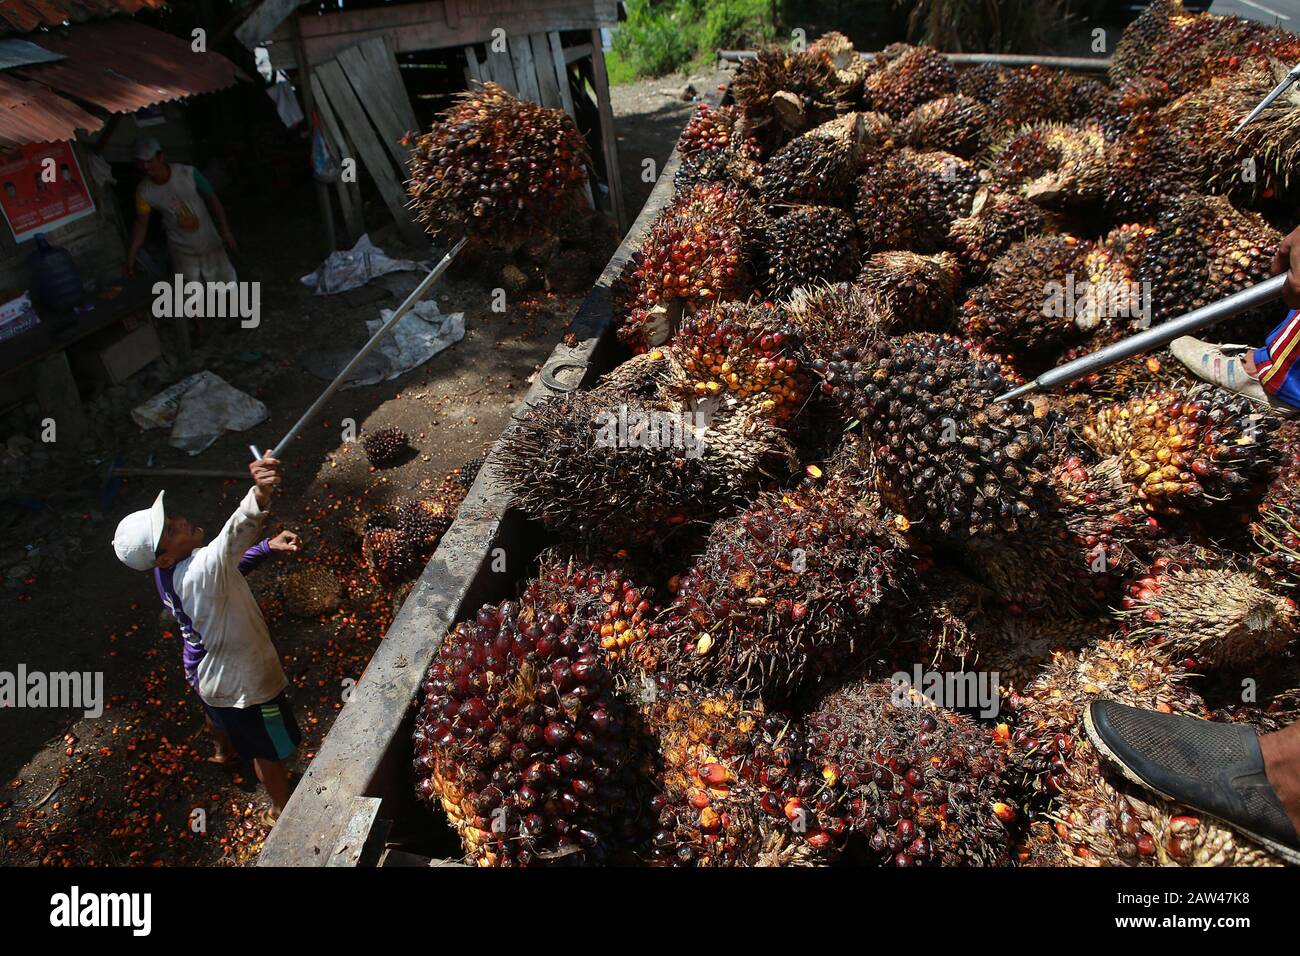 Workers seen collecting palm oil harvests in the village of Musi Banyuasin Regency, South Sumatra, Indonesia, on April 14, 2019. Farmers complain about low oil palm prices not reaching Rp. 2000 percent, this has an impact on the farmers' economy. Stock Photo